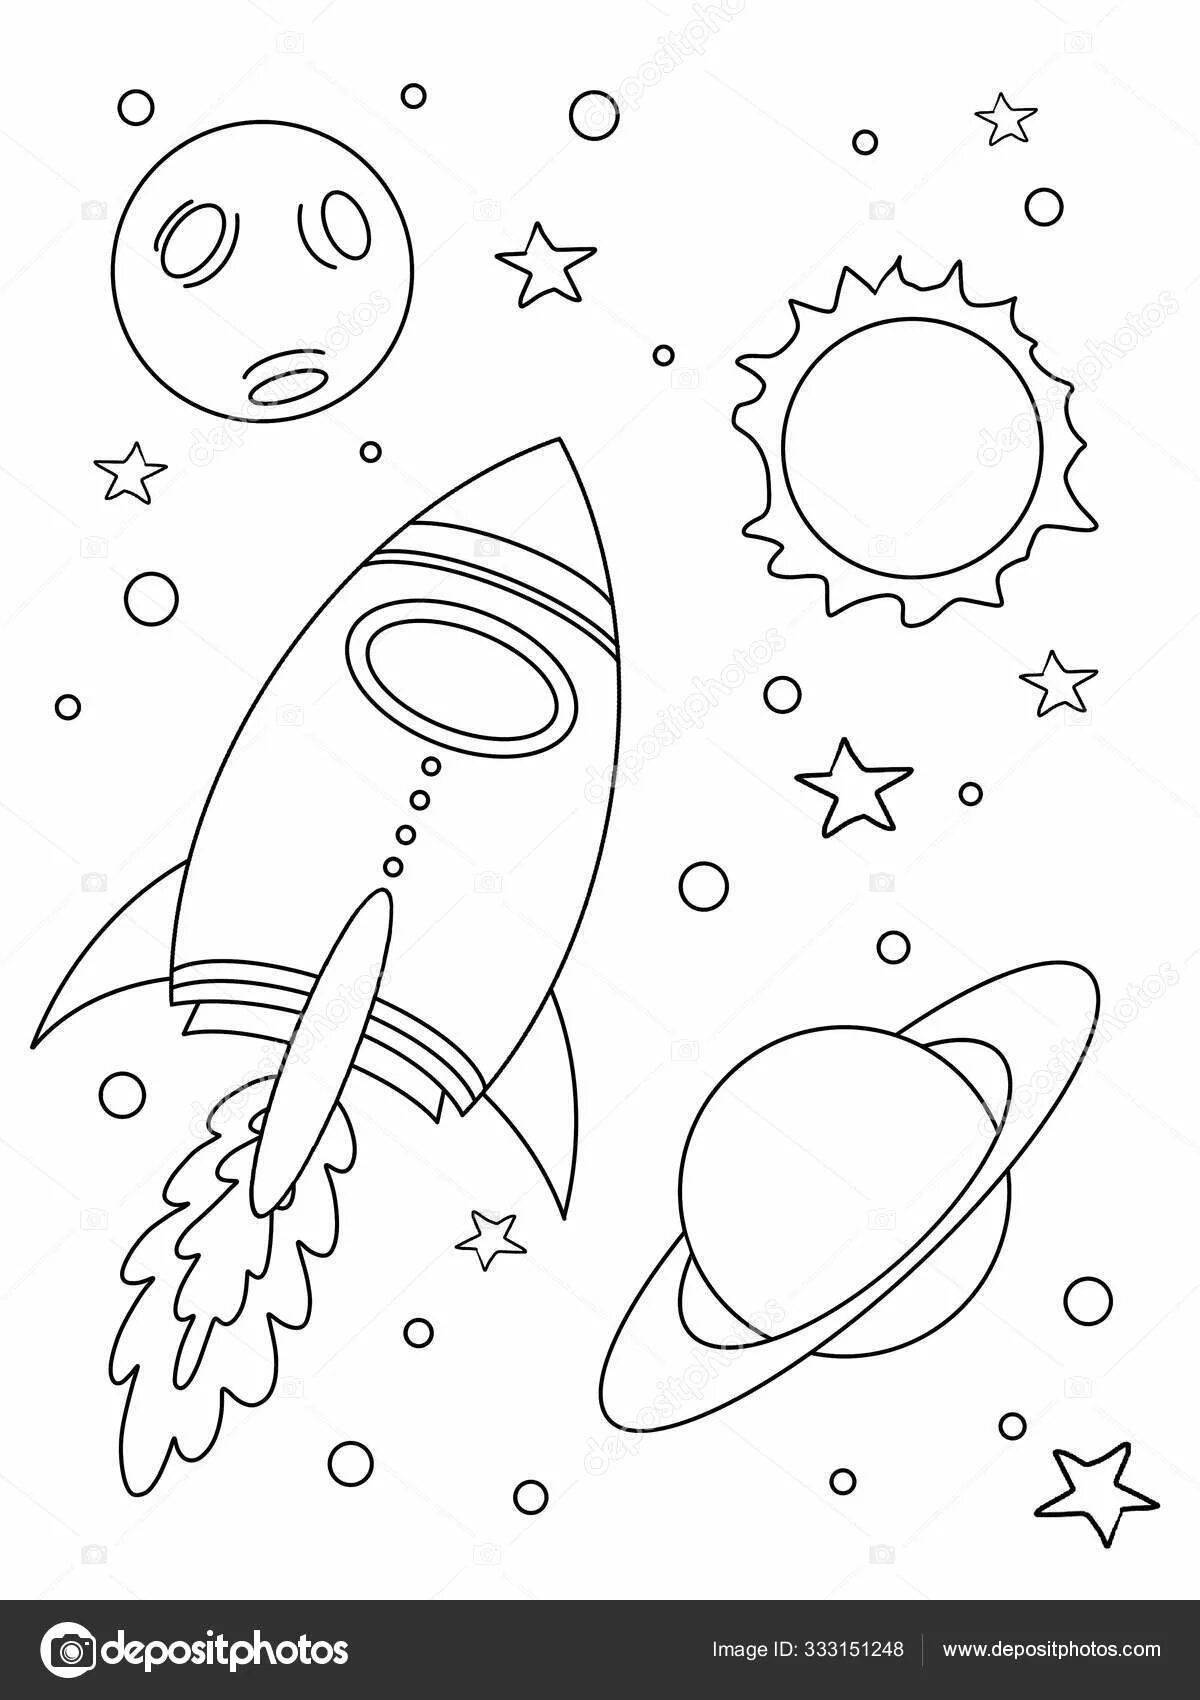 Amazing space coloring book for 4-5 year olds